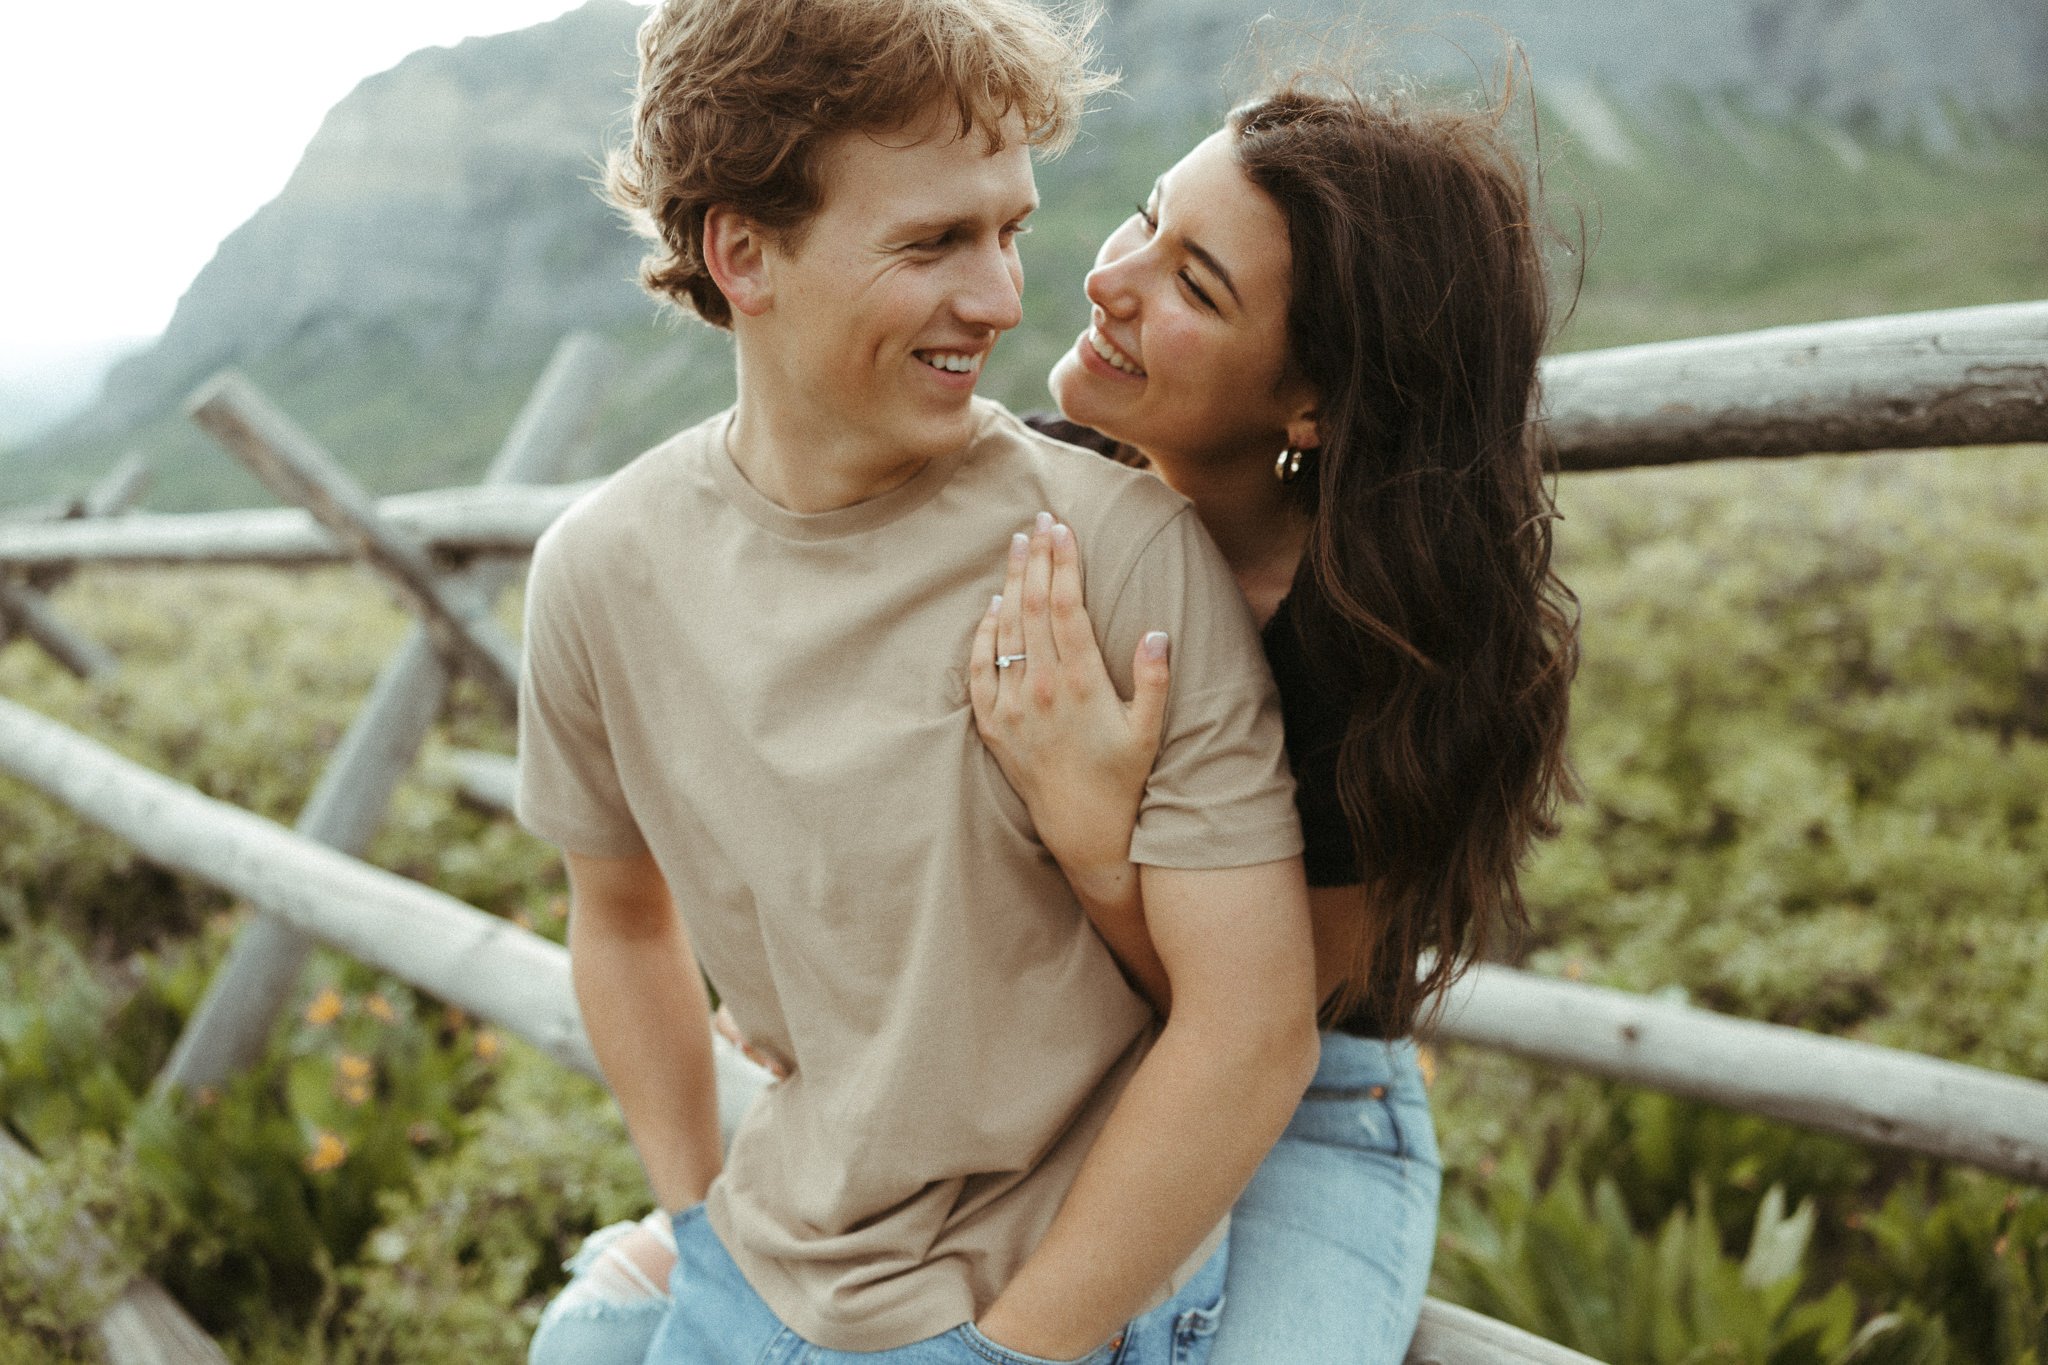 Spring-Provo-Canyon-Wildflowers-Engagement-Session-65